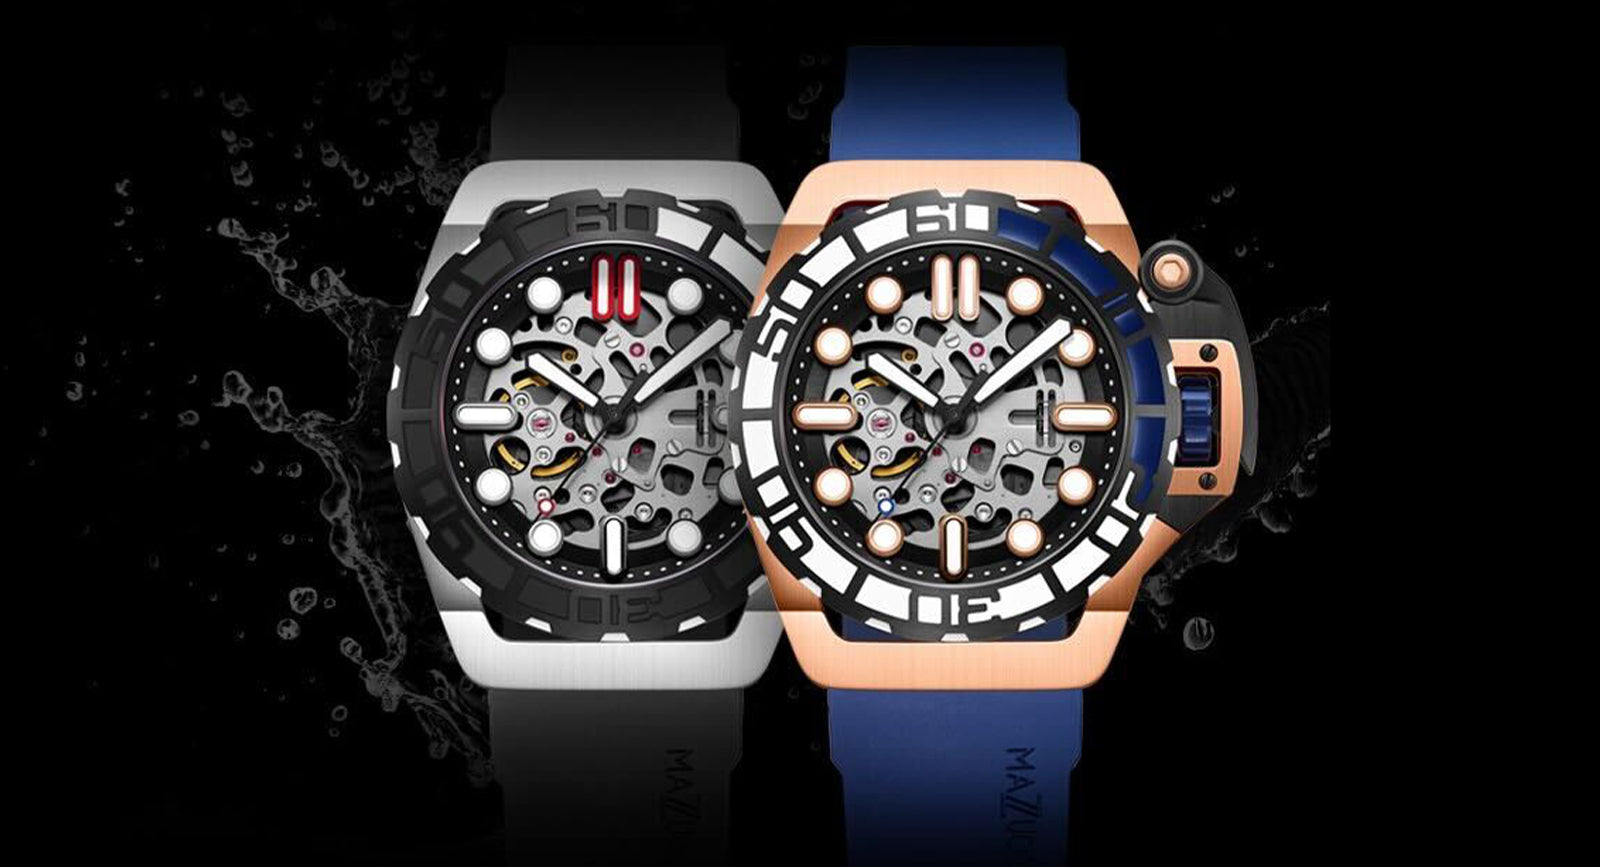 The Design And Functionality Of The Mazzucato Rim Sub Automatic Dive Watch